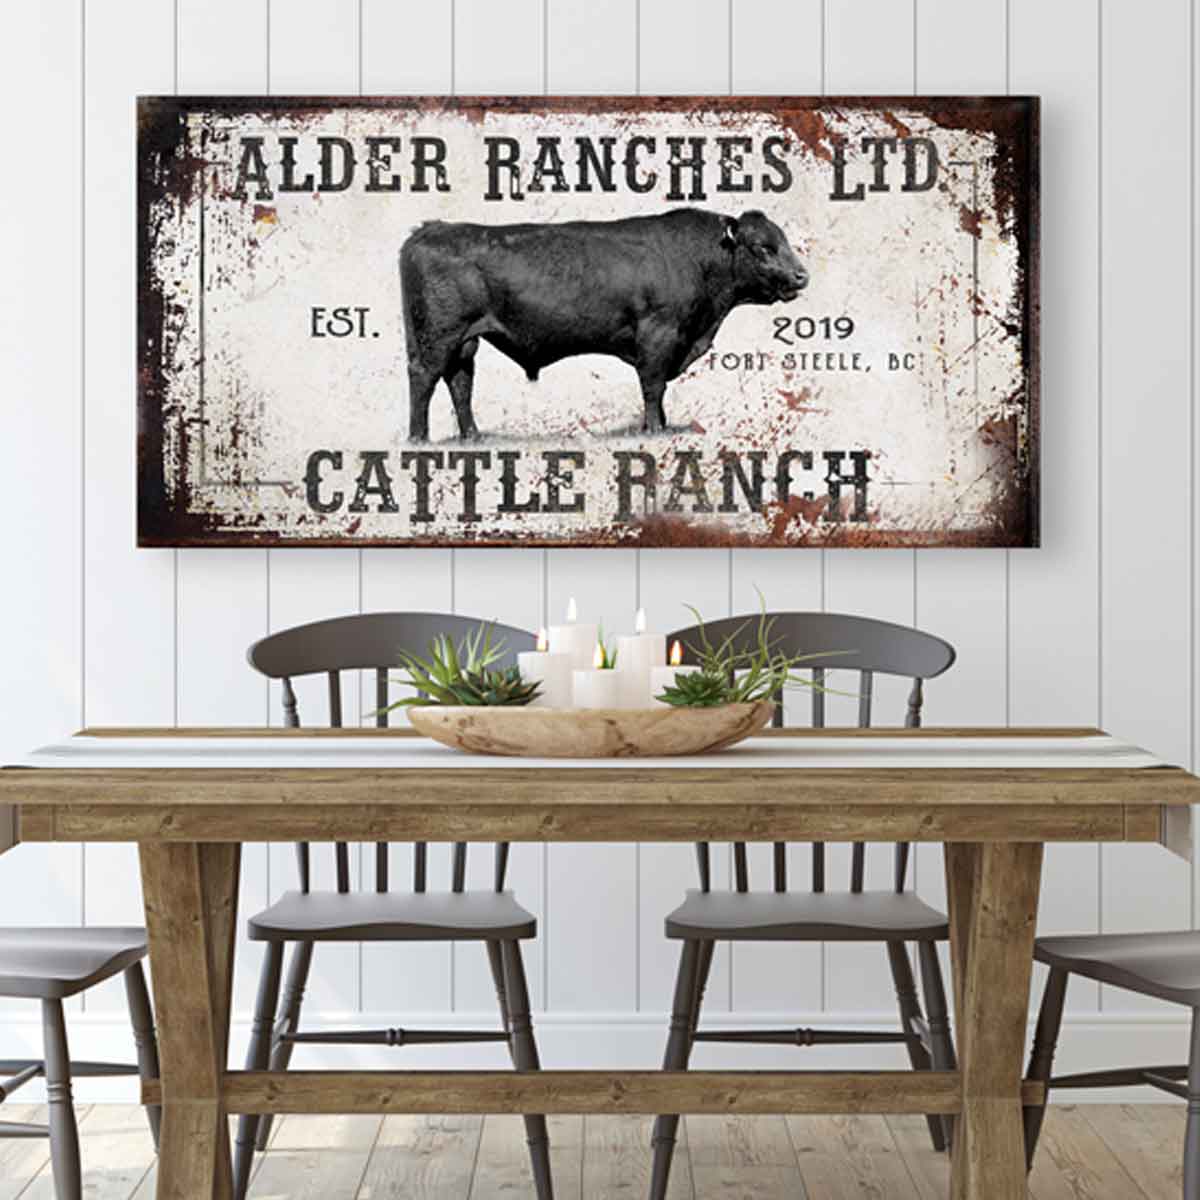 Cattle Ranch Decor with a big Bull on rustic tailored canvas with the words (family name) Cattle Ranch with date, and city